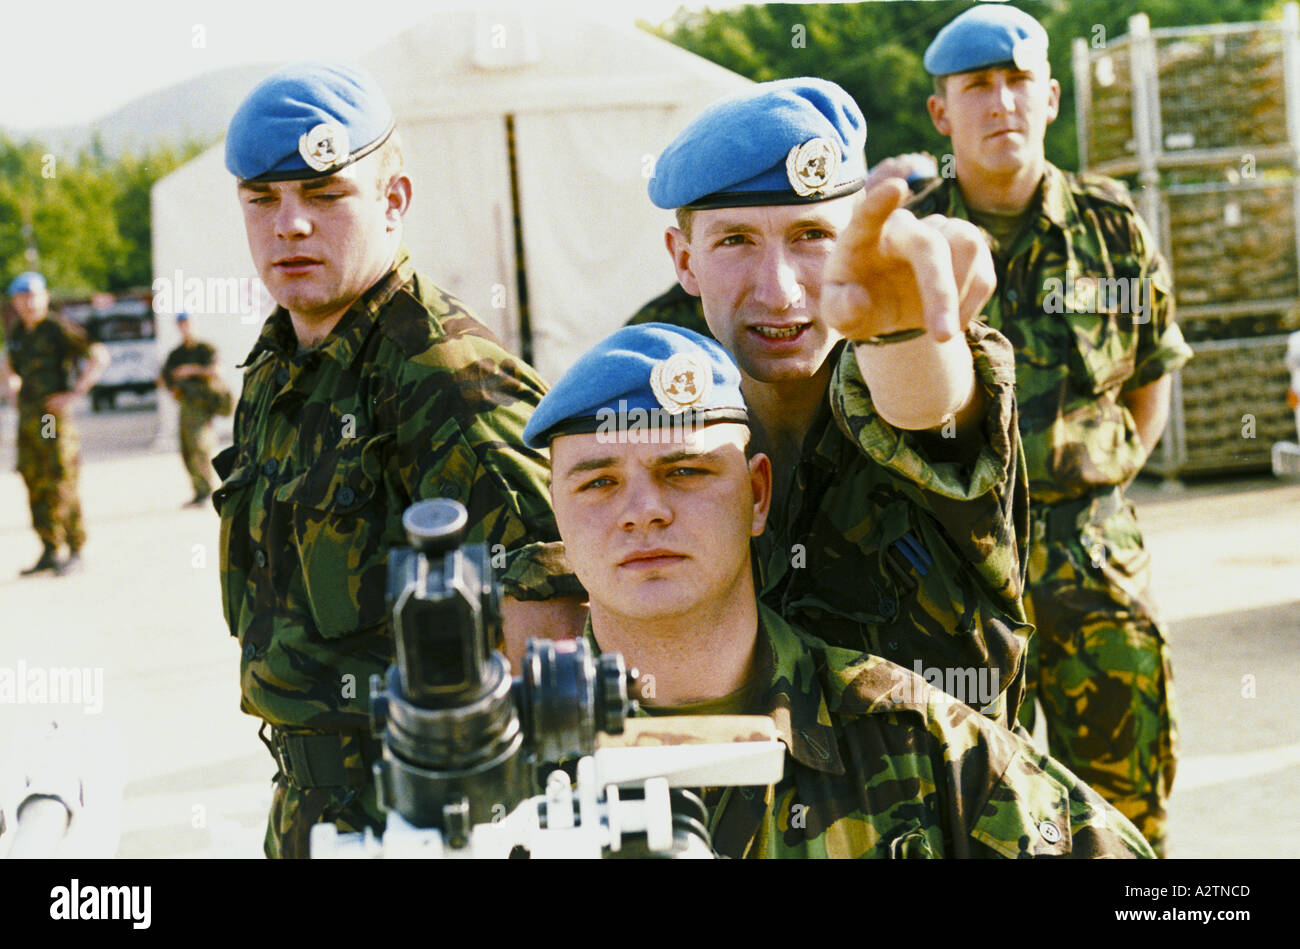 central bosnia june 1995 british soldiers Stock Photo